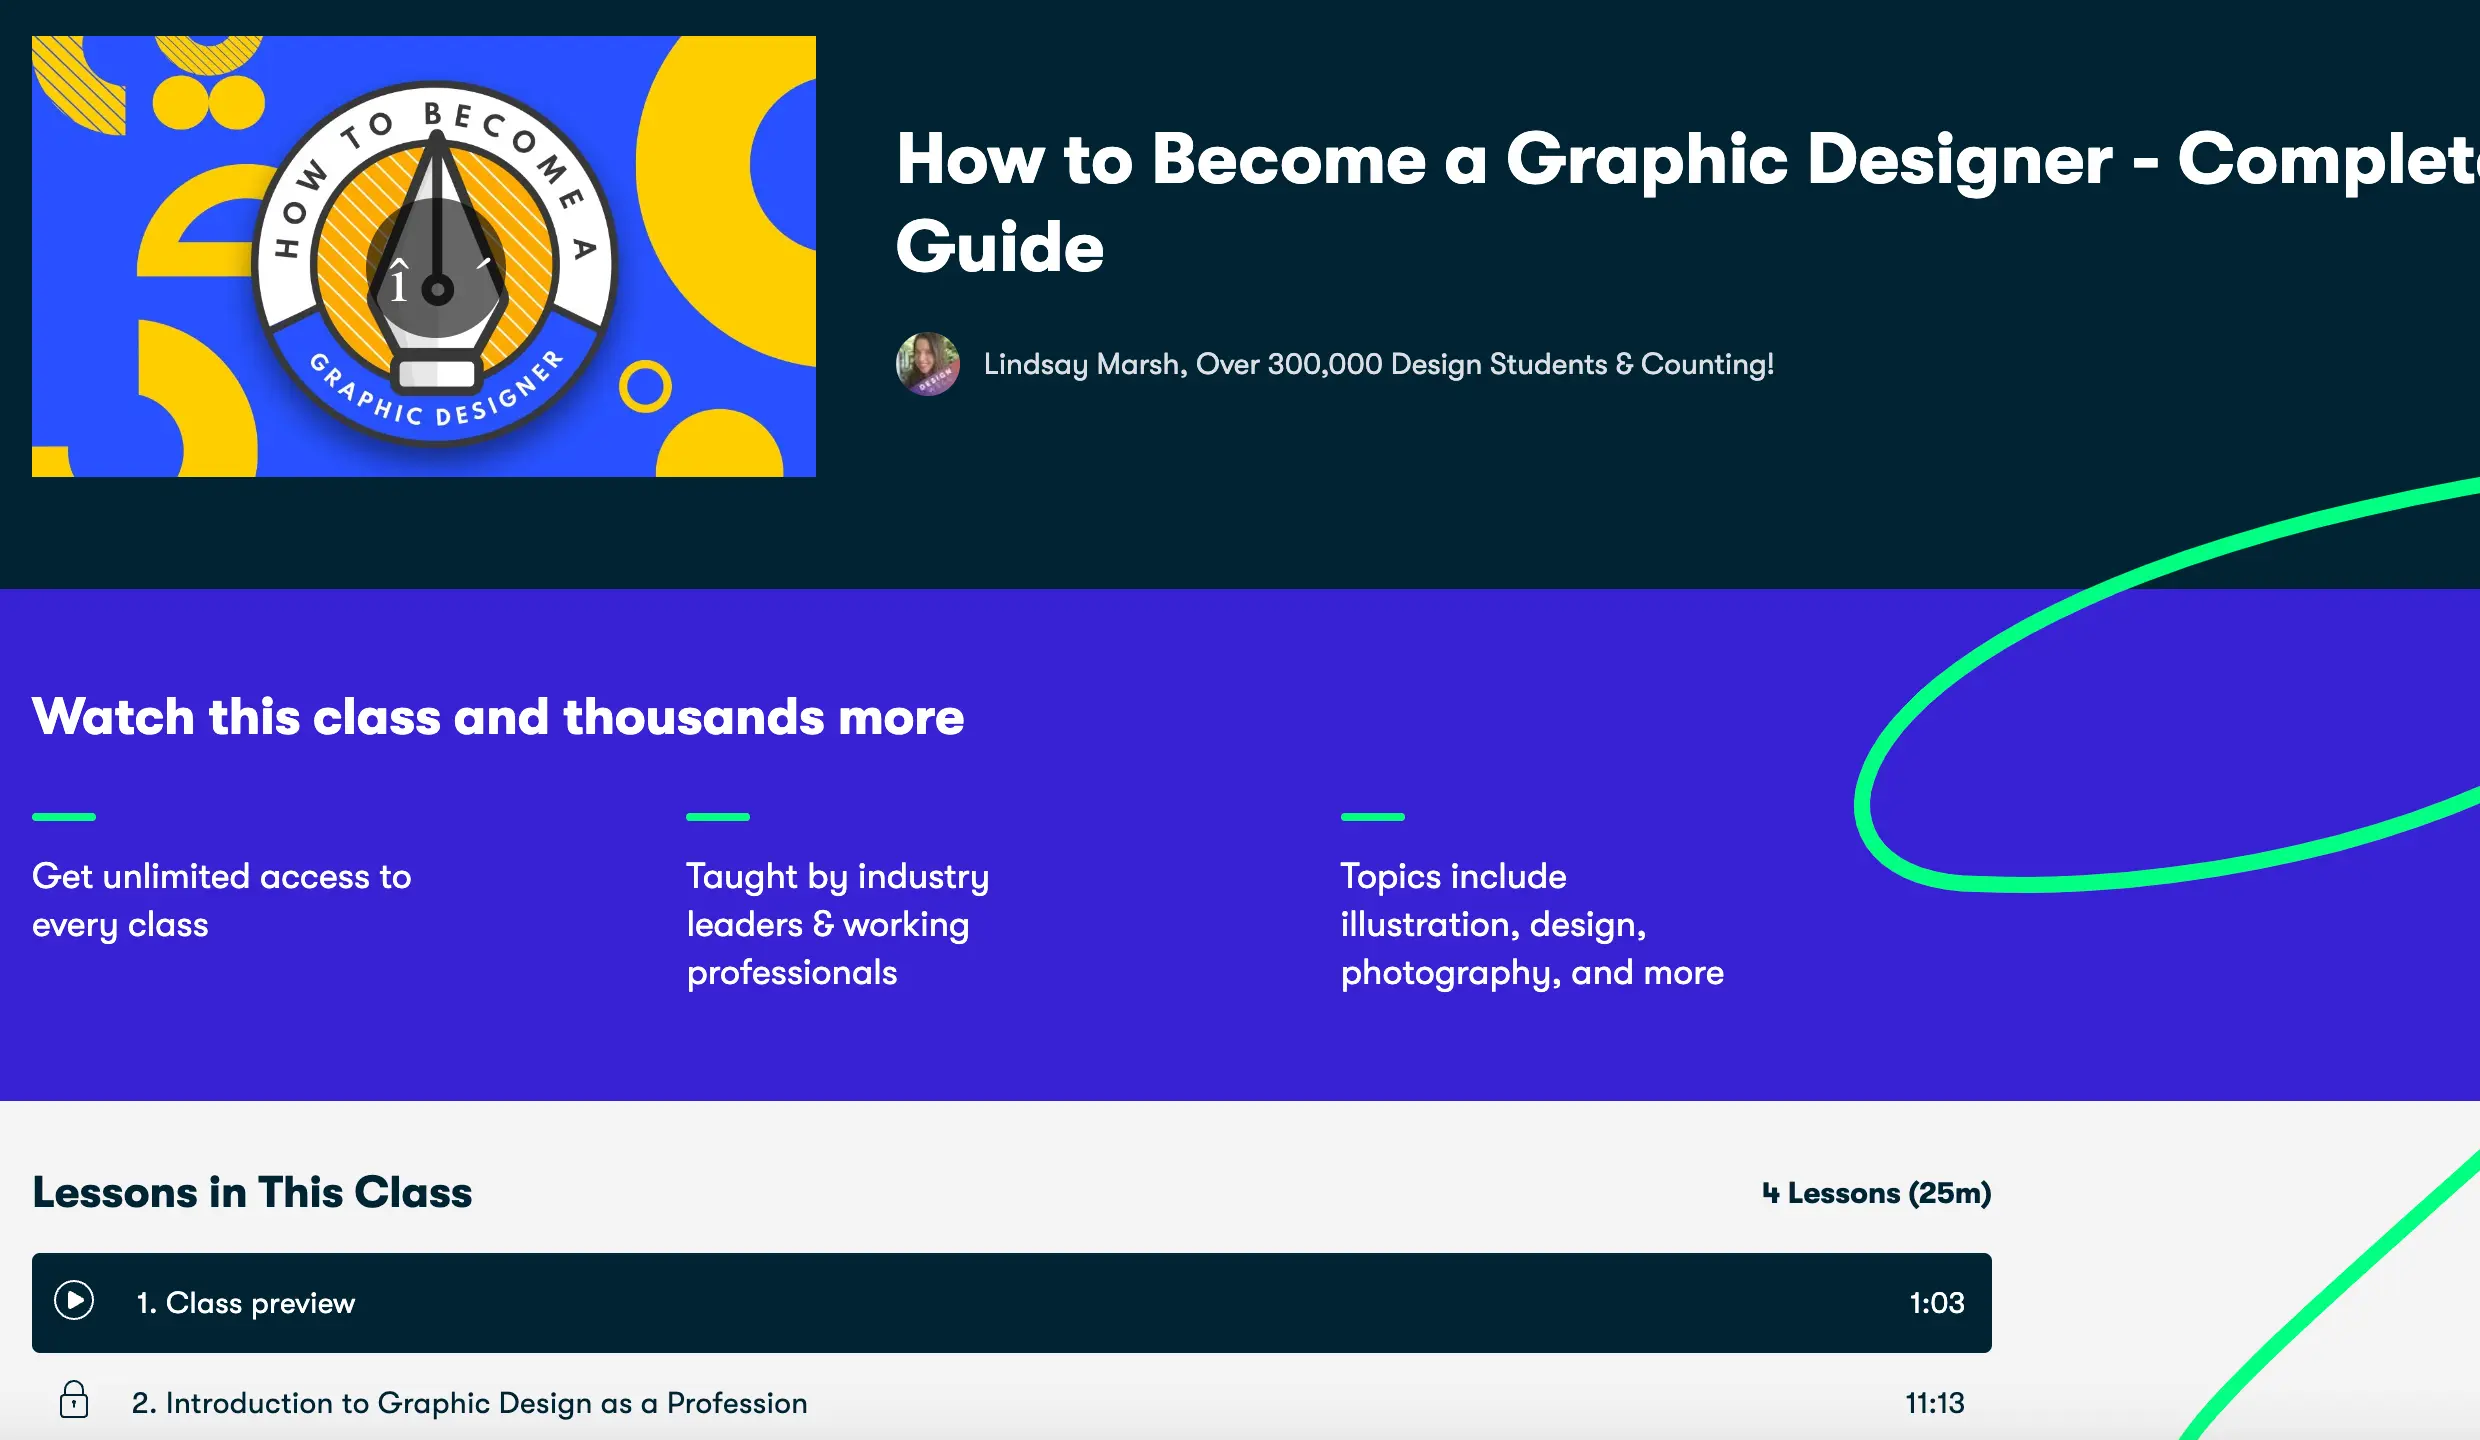 How to Become a Graphic Designer - Complete Guide